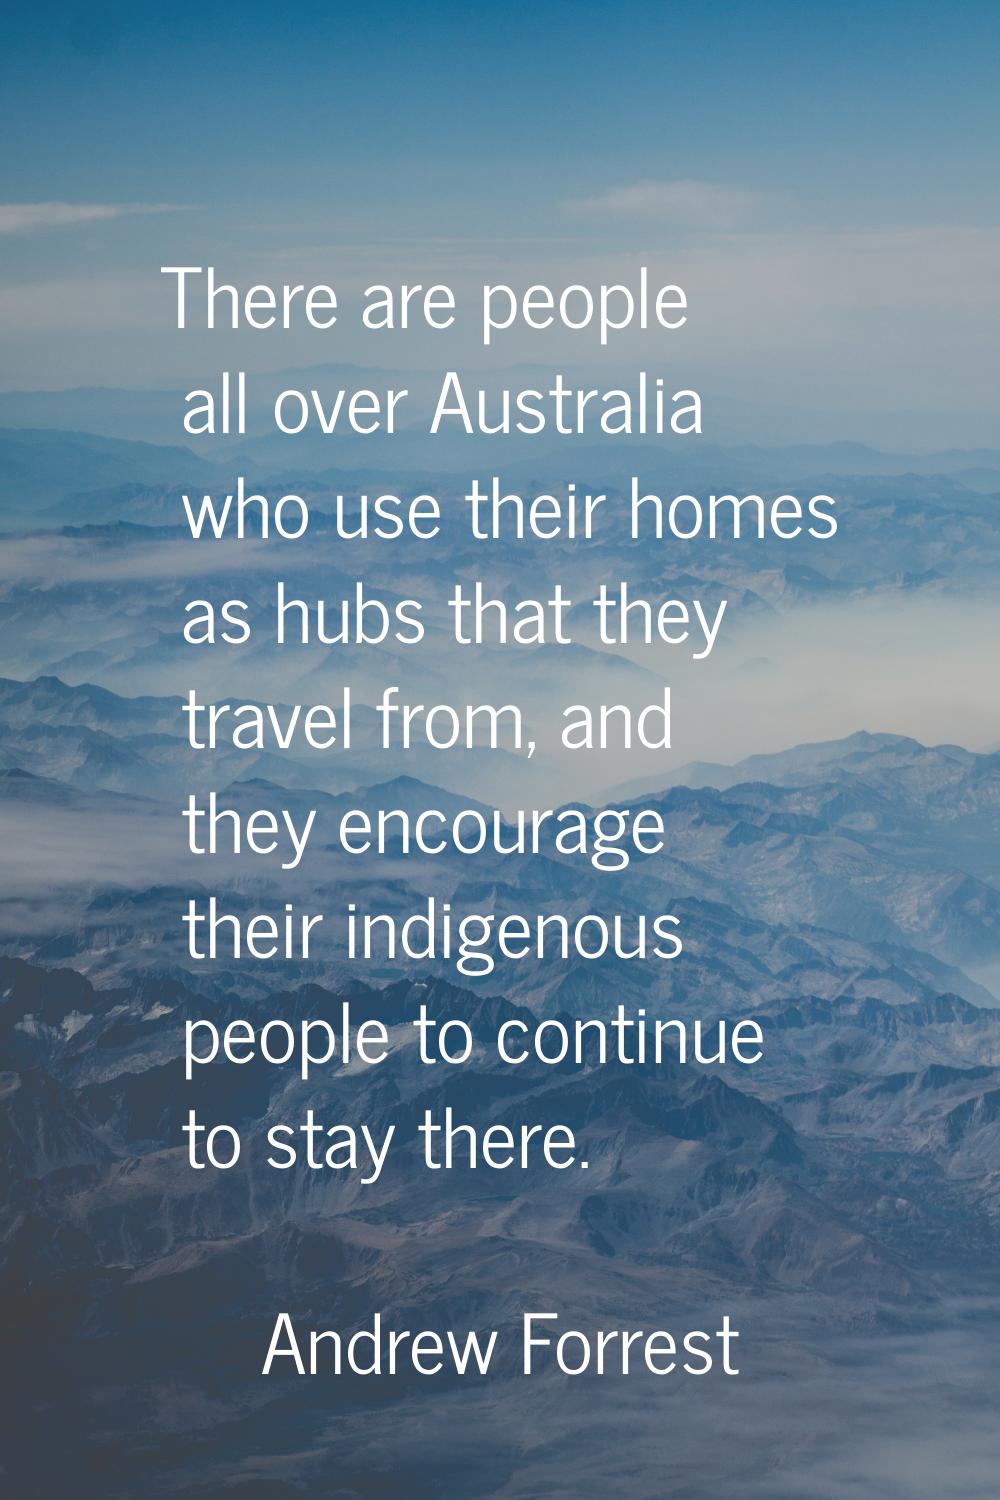 There are people all over Australia who use their homes as hubs that they travel from, and they enc